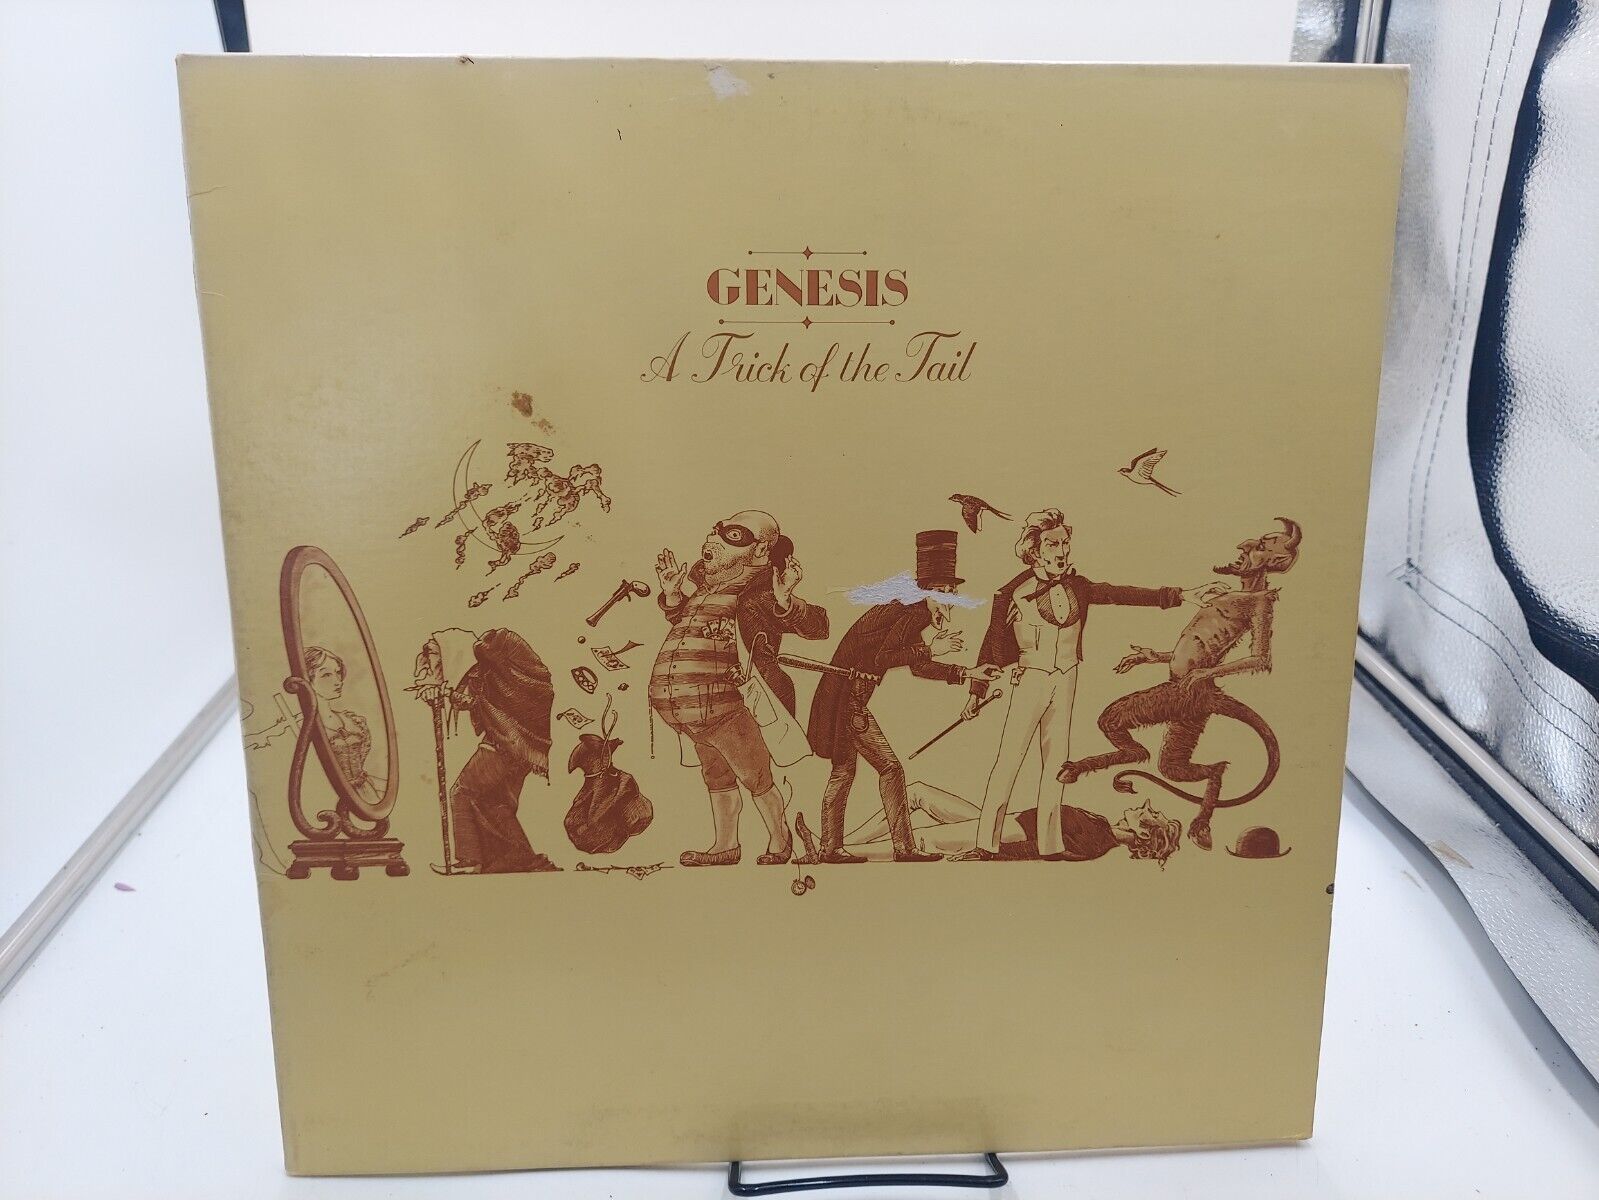 Genesis A Trick of The Tail LP Record ATCO 1976 ATCO Ultrasonic Clean EX cVG+